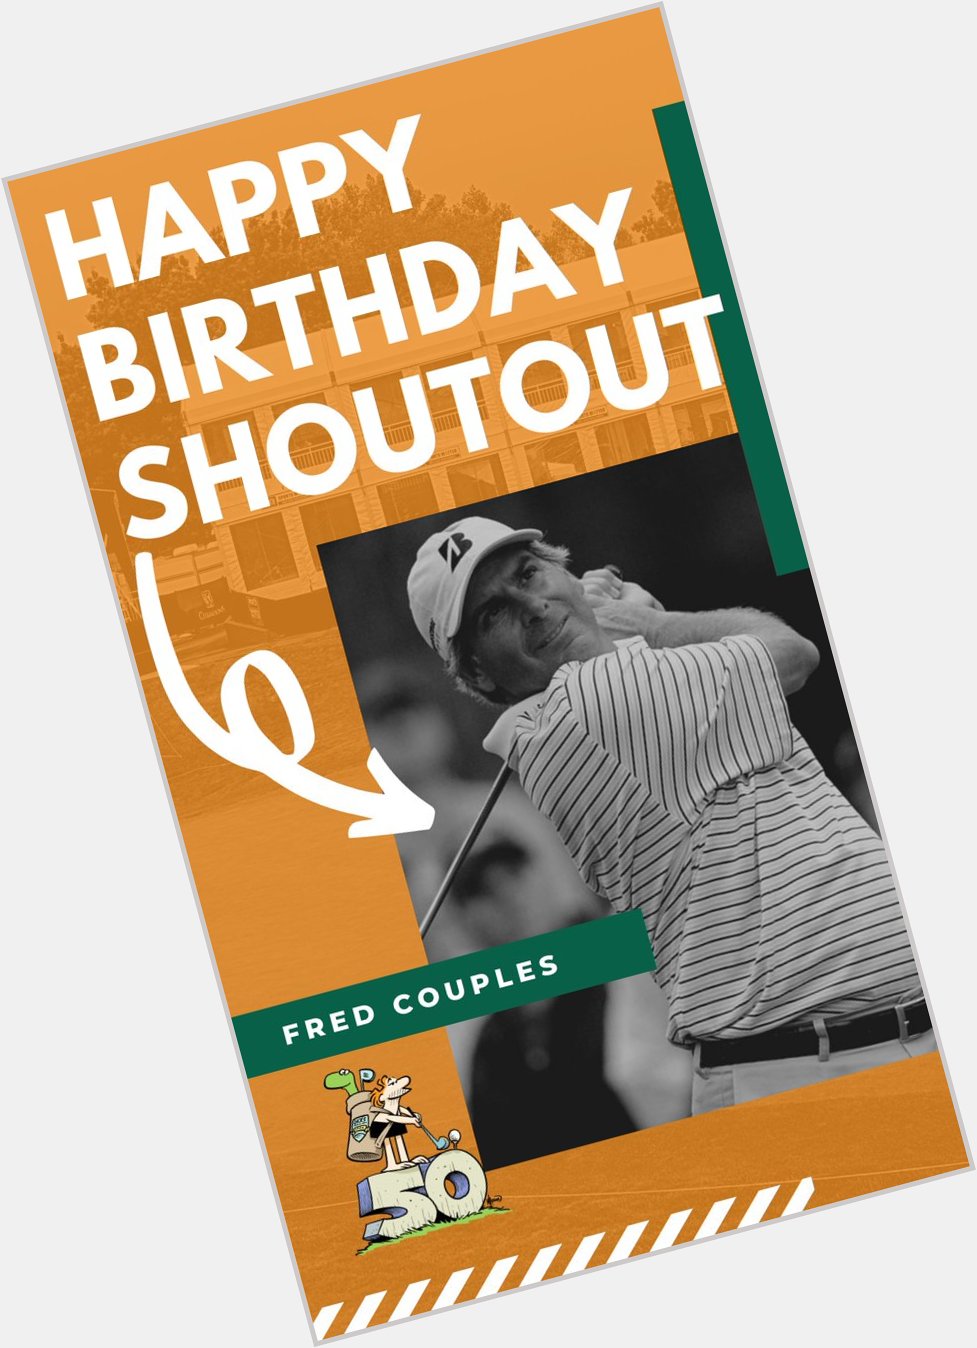 Happy Birthday to Fred Couples! 